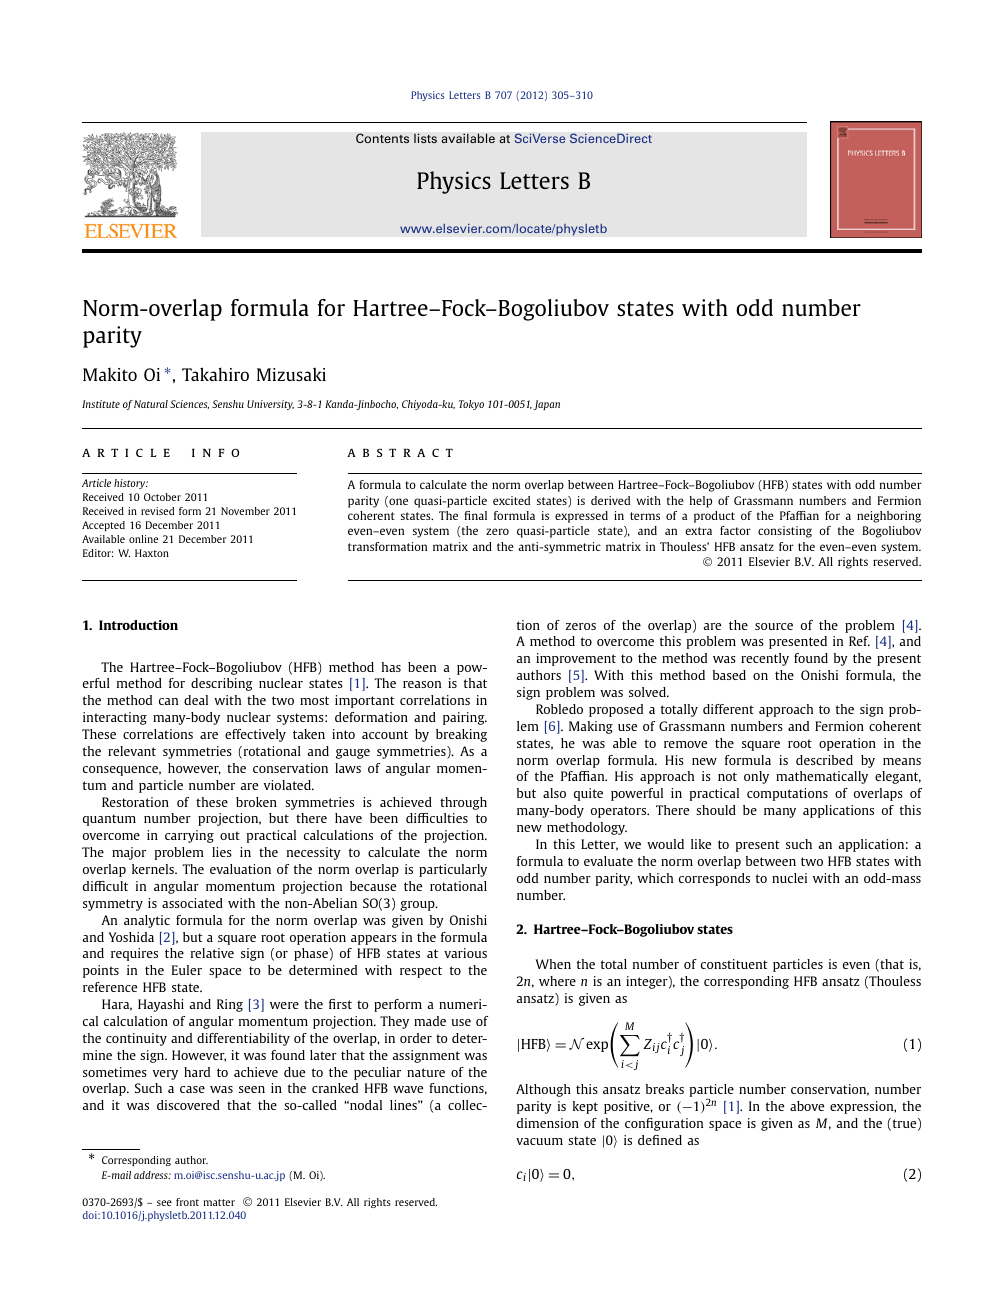 Norm Overlap Formula For Hartree Fock Bogoliubov States With Odd Number Parity Topic Of Research Paper In Physical Sciences Download Scholarly Article Pdf And Read For Free On Cyberleninka Open Science Hub